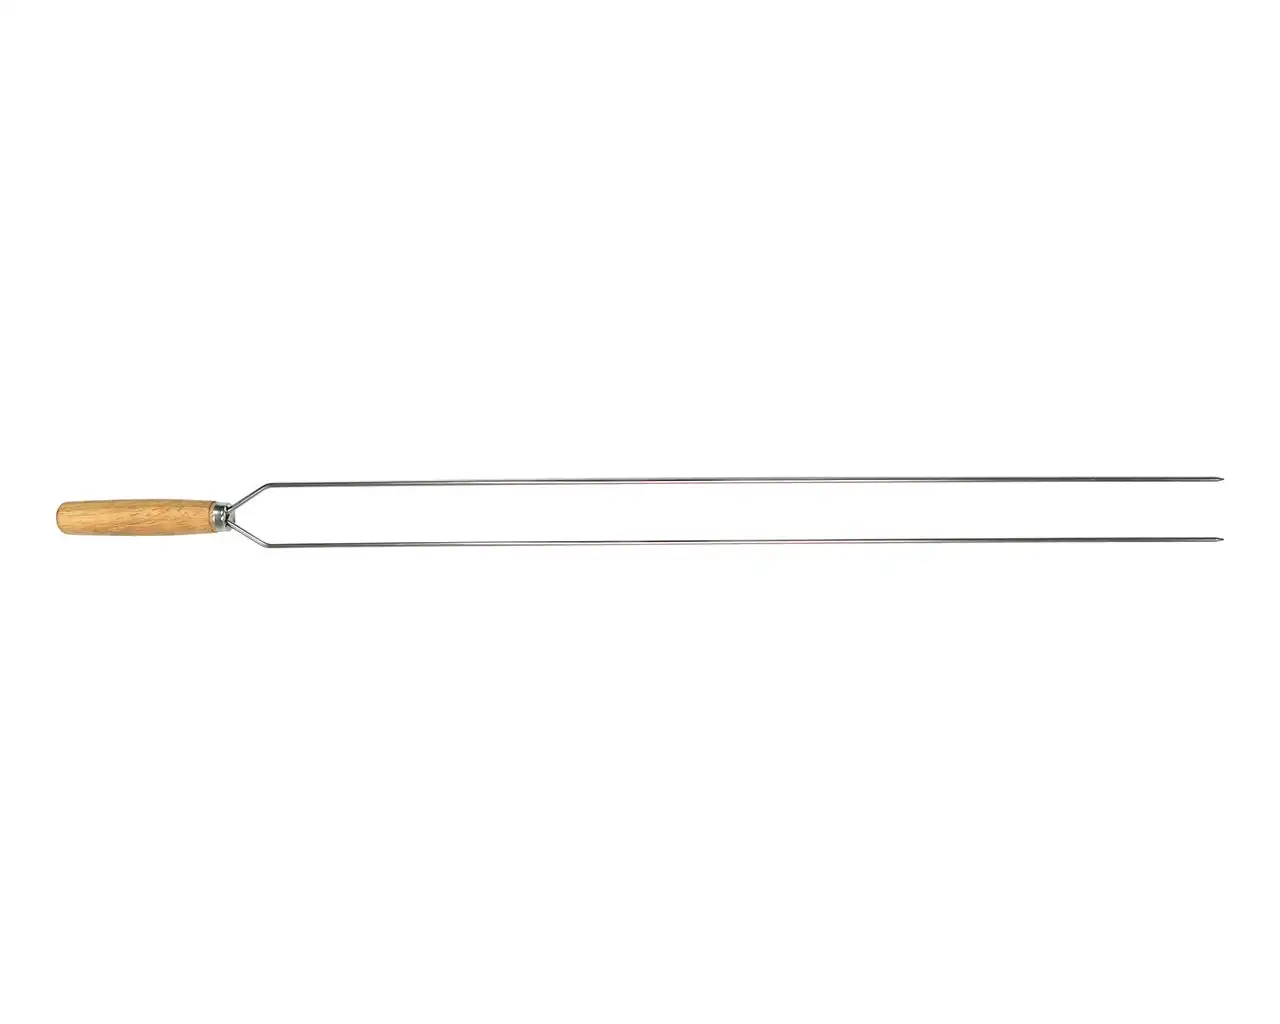 Pro Grill 90cm Double Prong Large Skewer